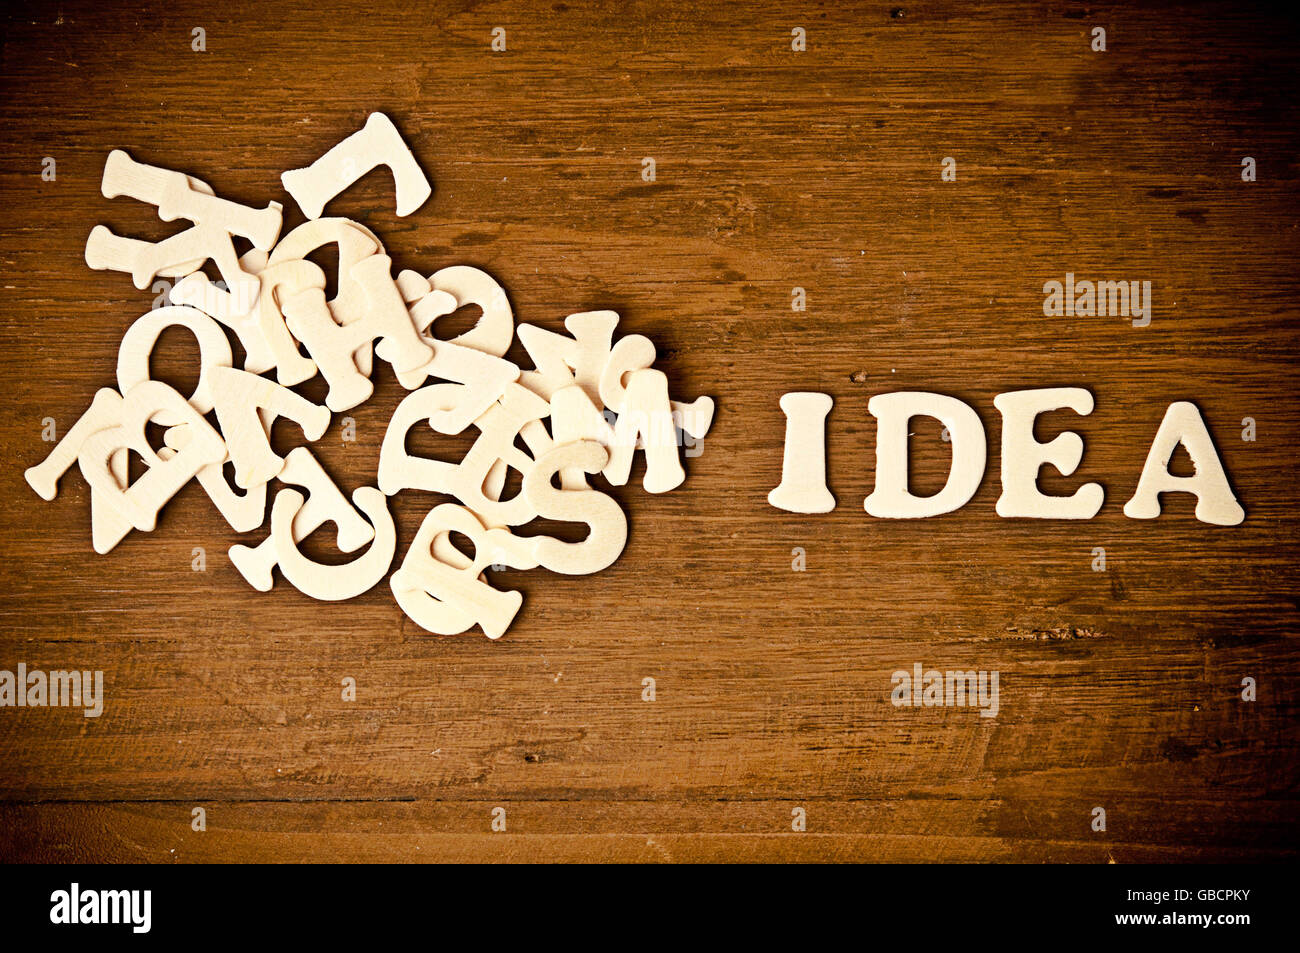 ideas, brainstorming, creativity and imagination concept Stock Photo